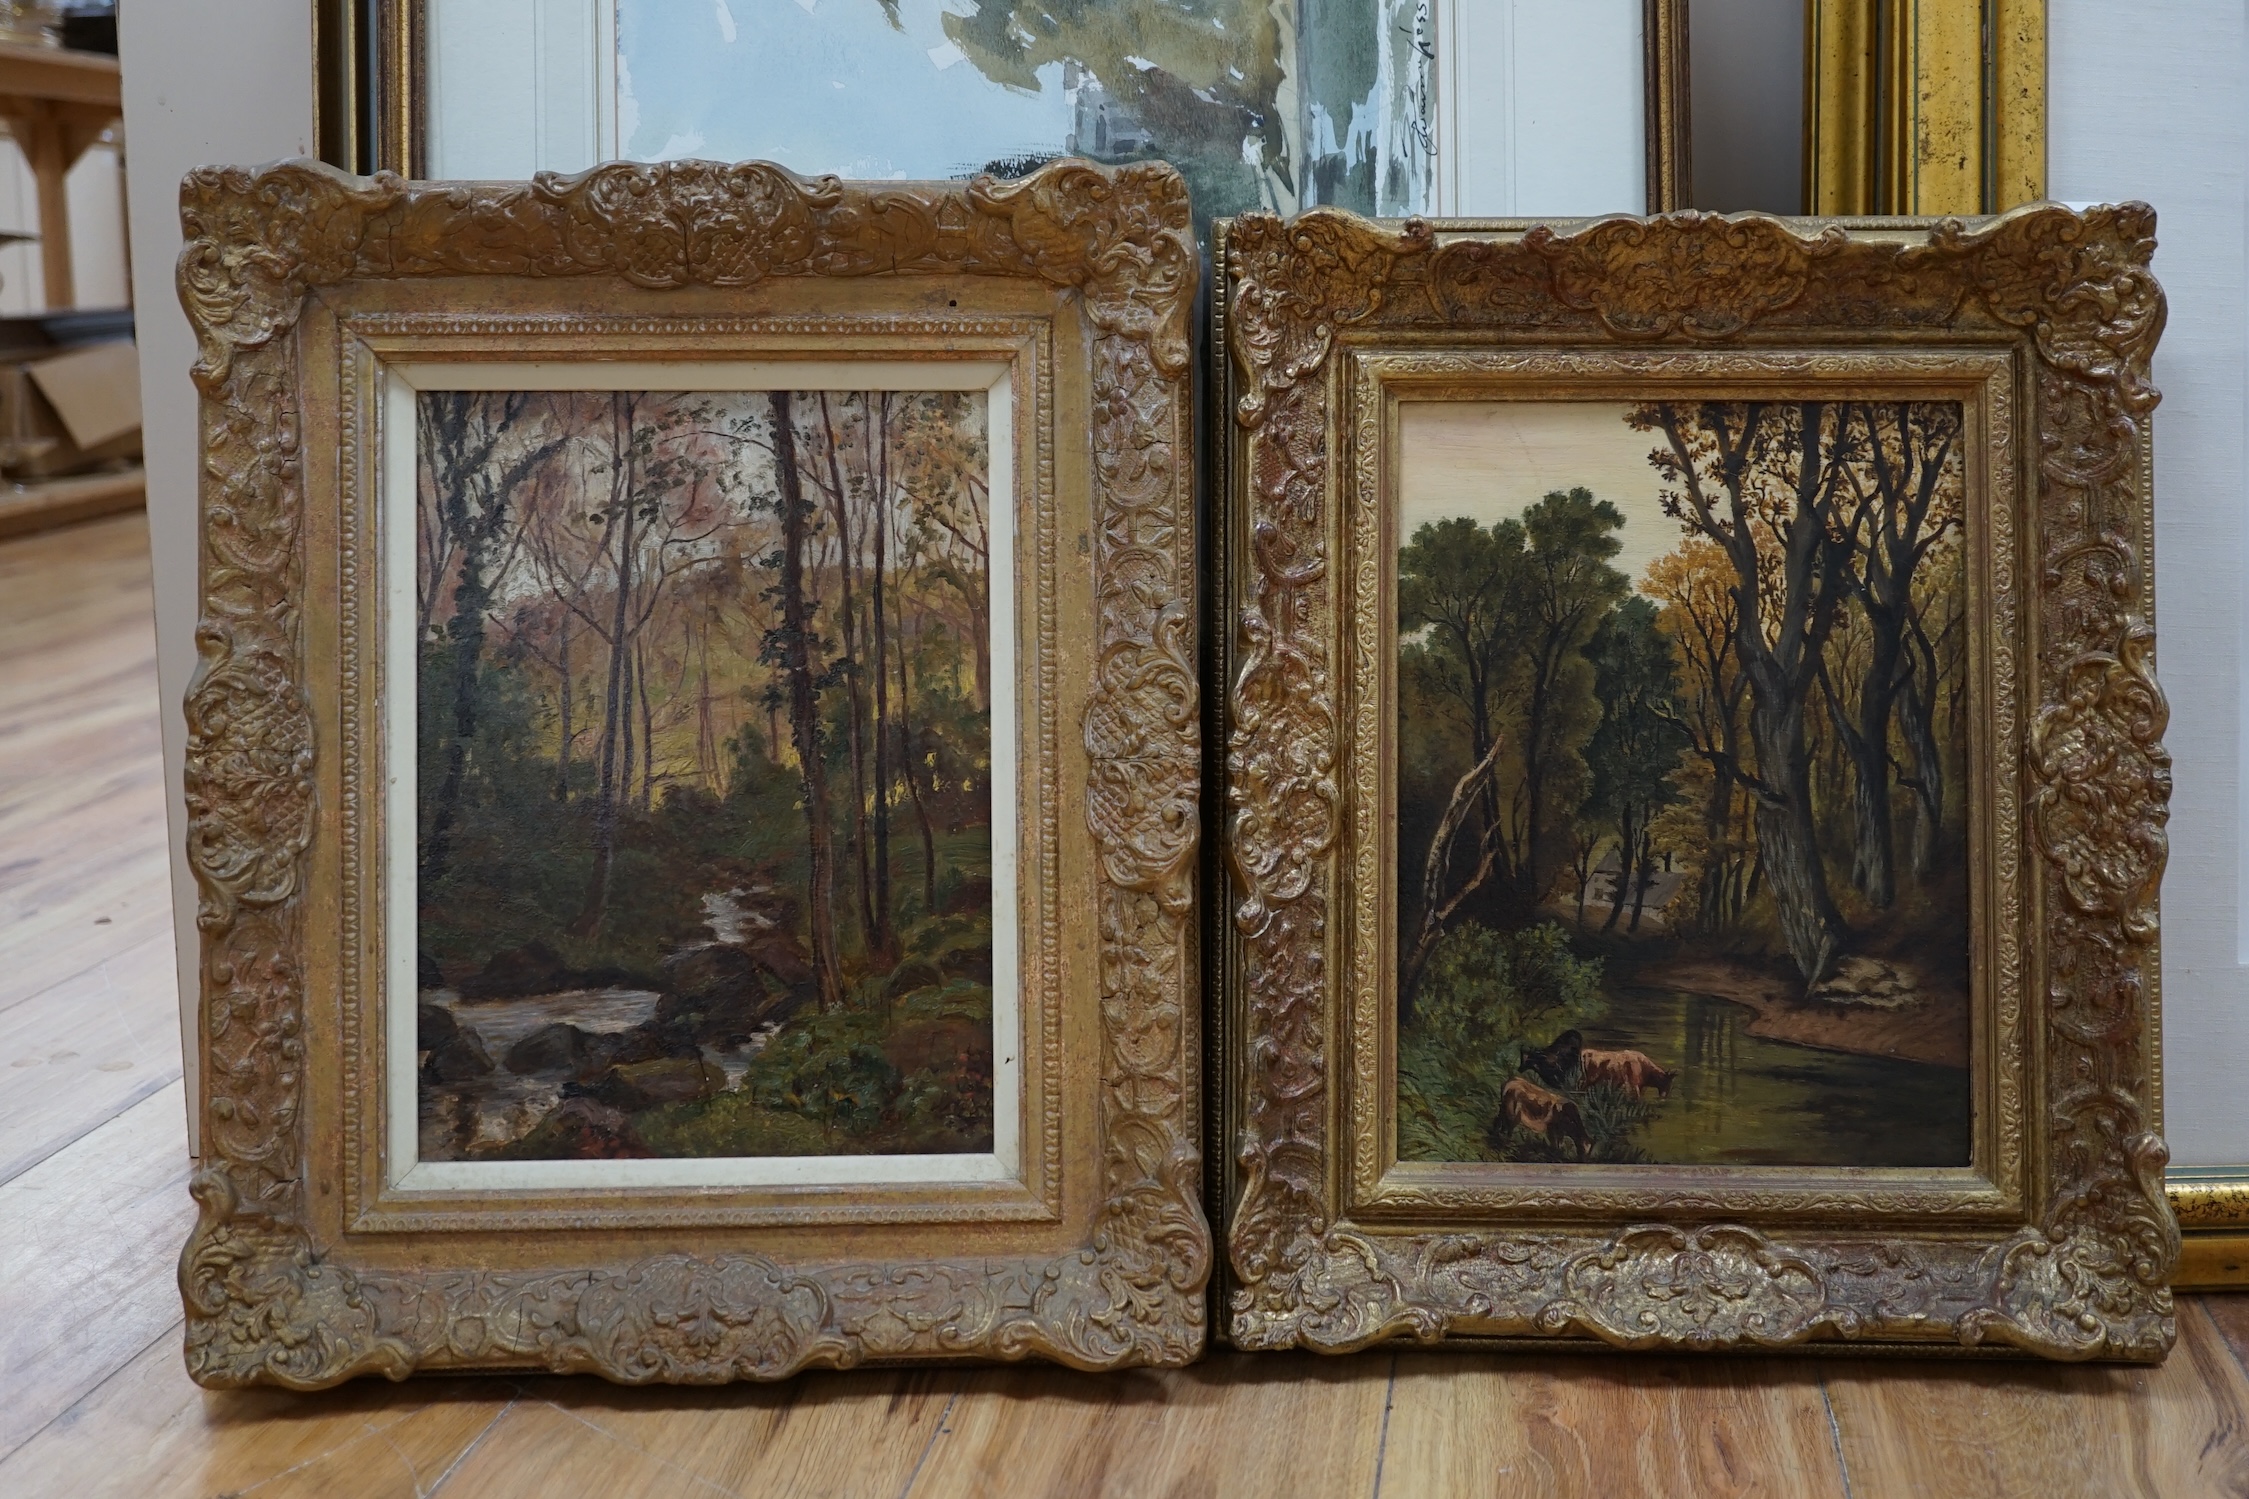 20th century English School, near pair of oils on canvas, Wooded landscapes with streams, 29 x 22cm. Condition - fair to good